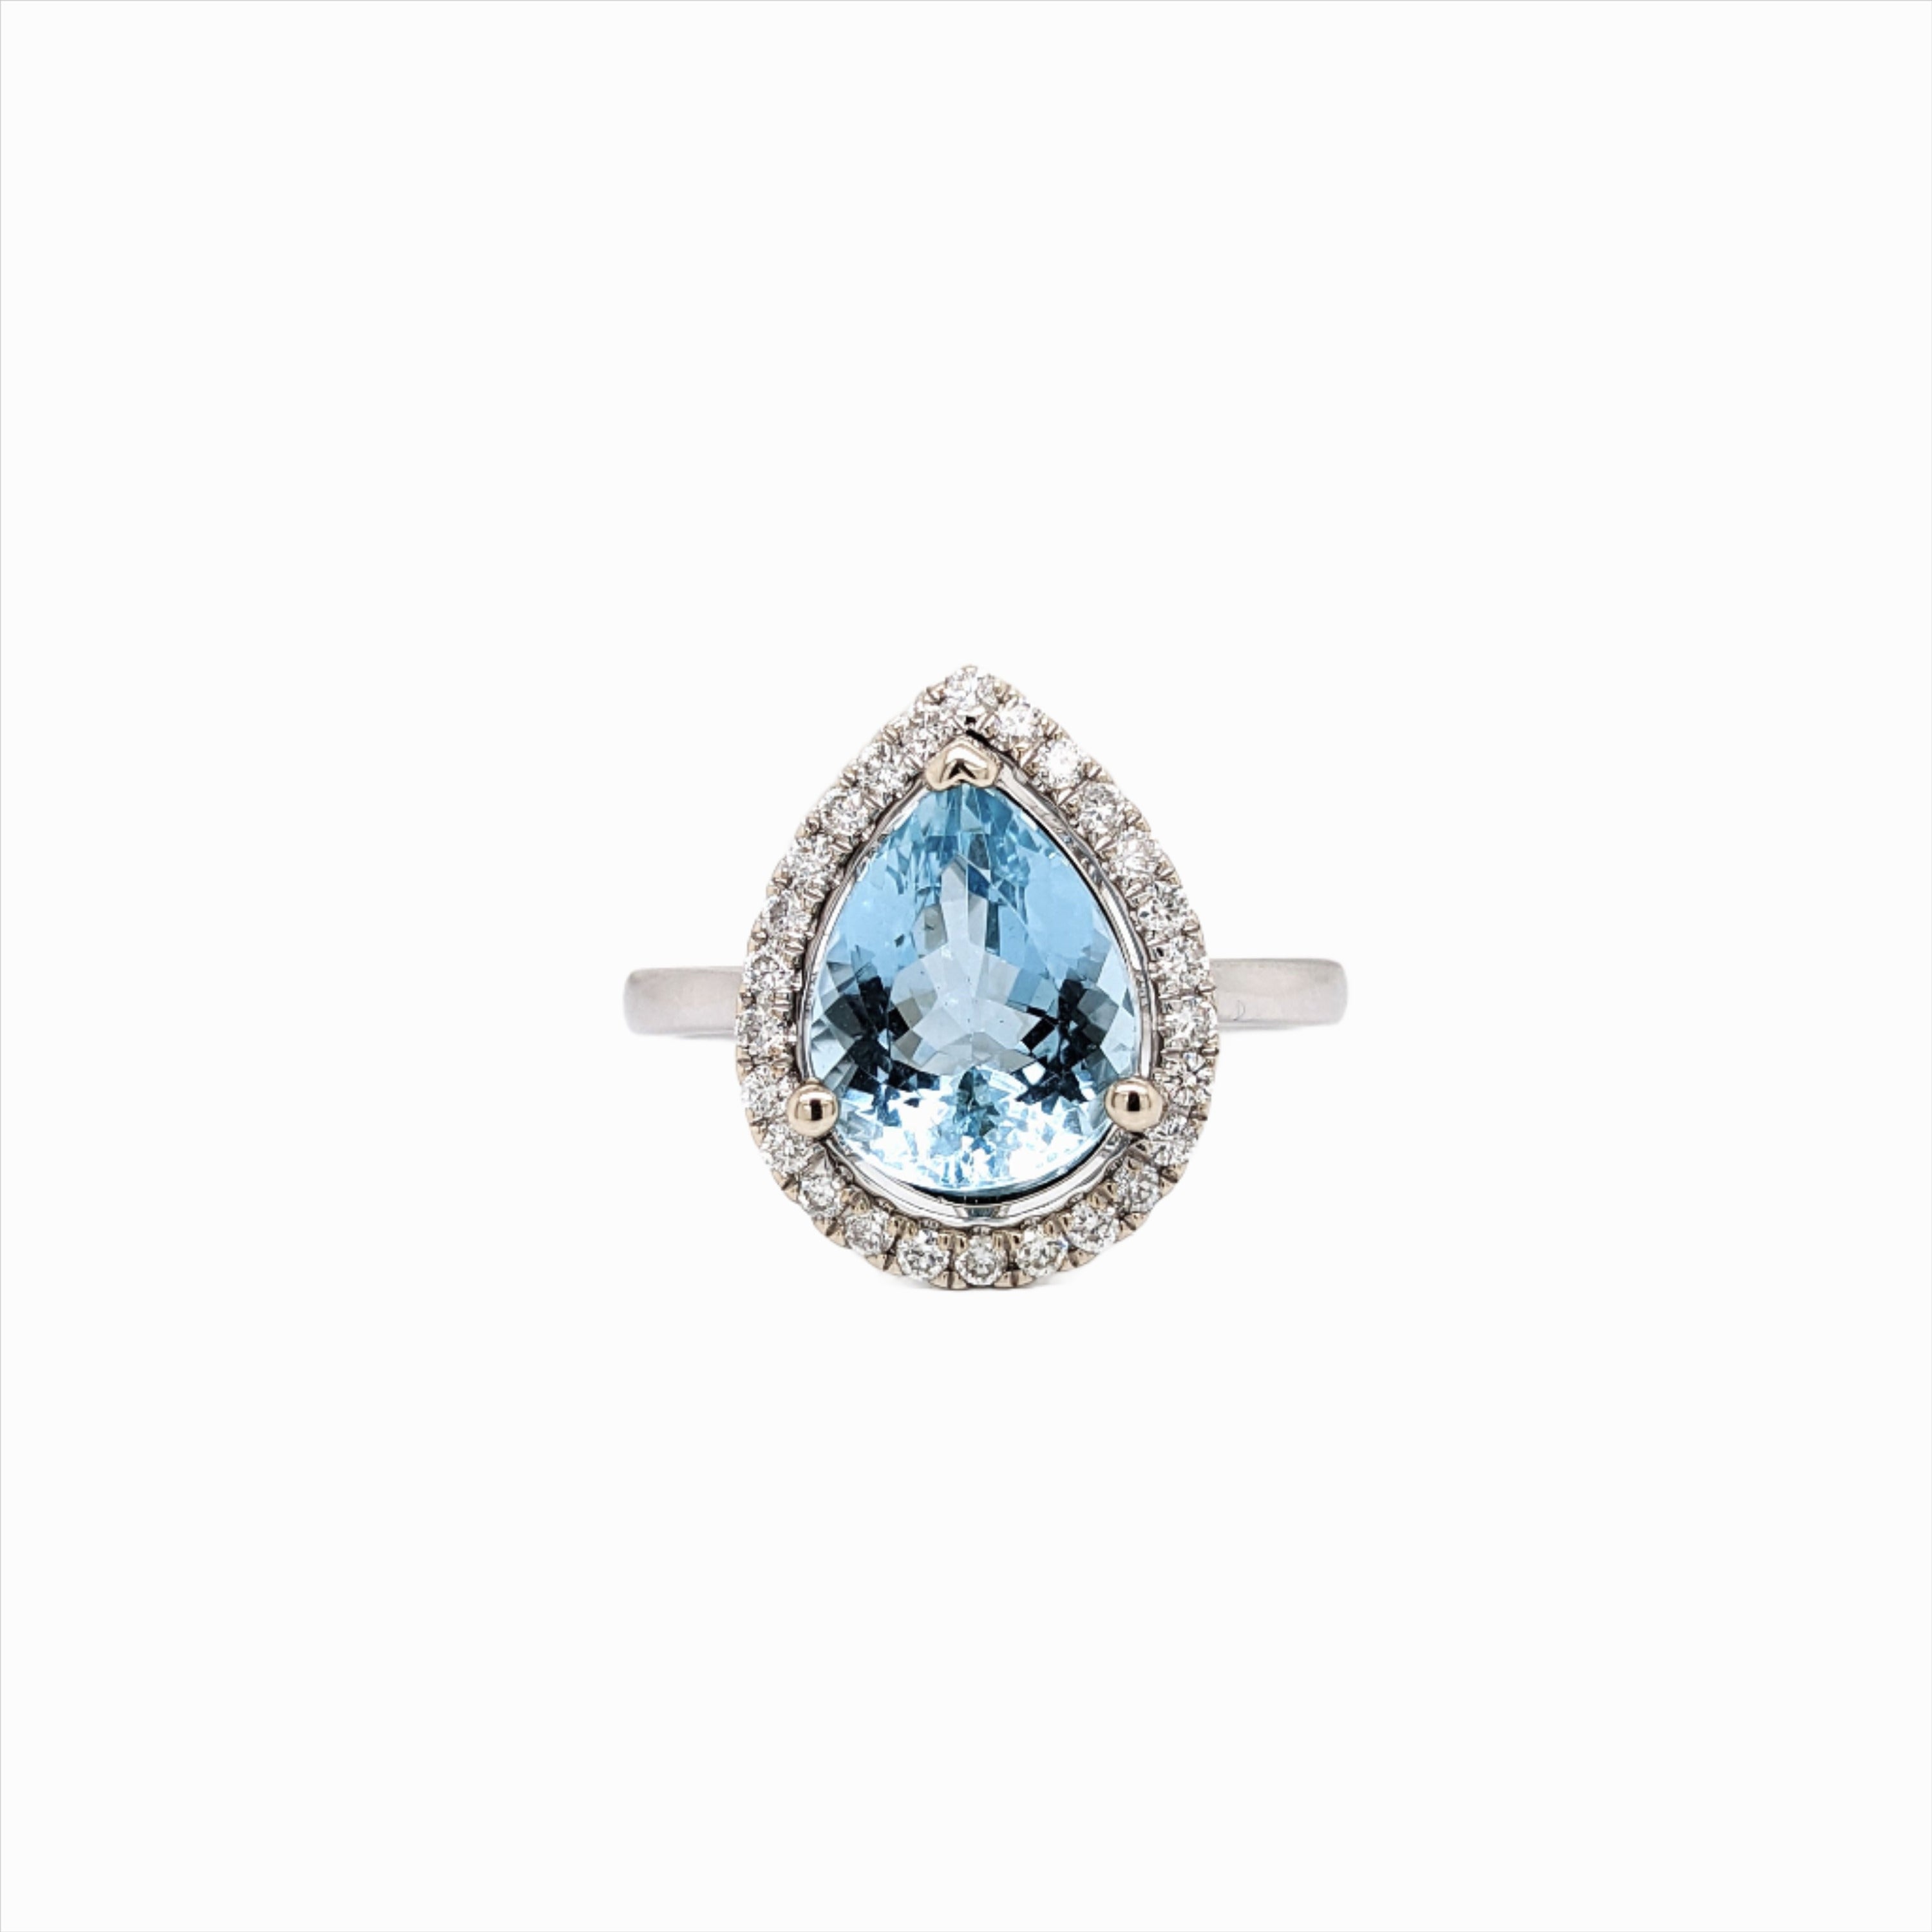 Stunning Aquamarine Ring in Solid 14K White Gold with a Halo of Natural Diamonds | Pear 11x8mm | Natural | Gemstone Jewelry | March Birthday